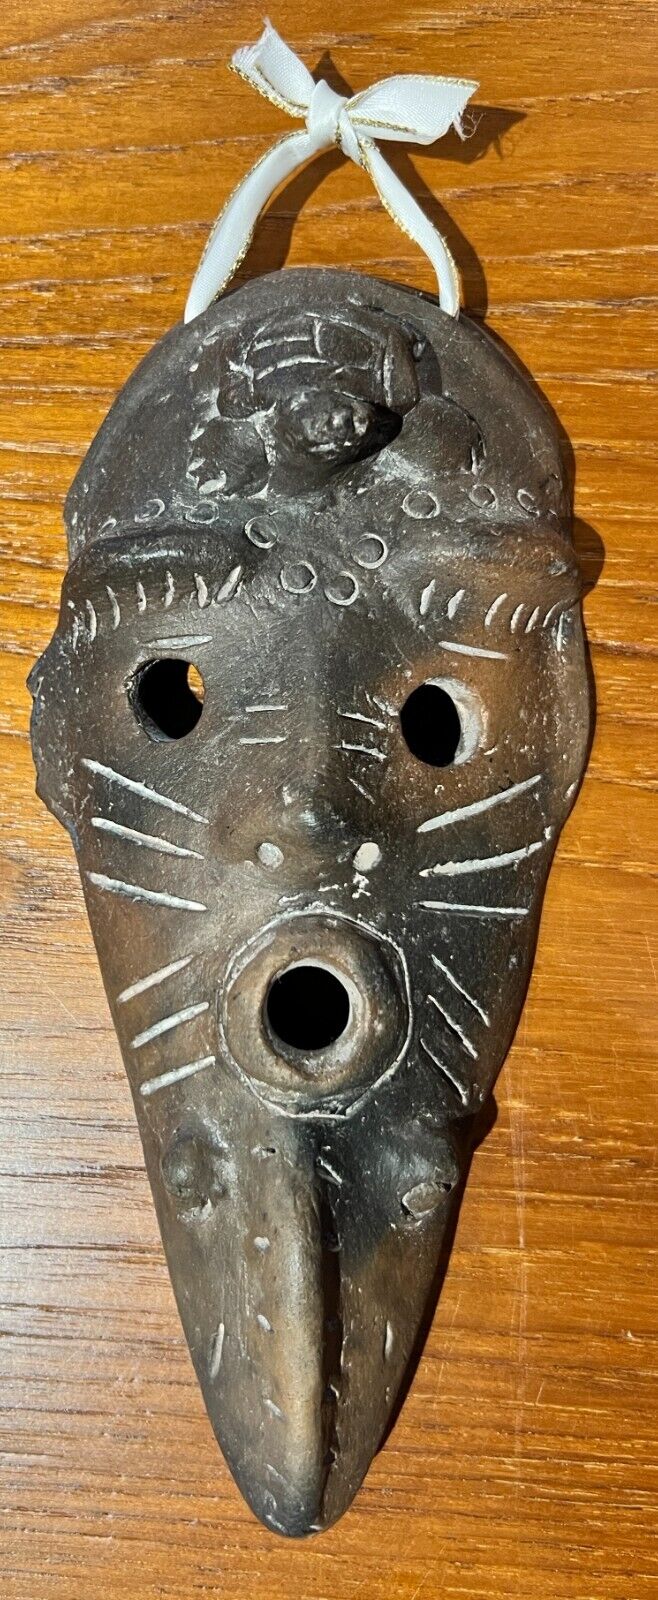 Vintage Rare Clay Tribal Mask With 3 Characters Alligator, Turtle, and Human